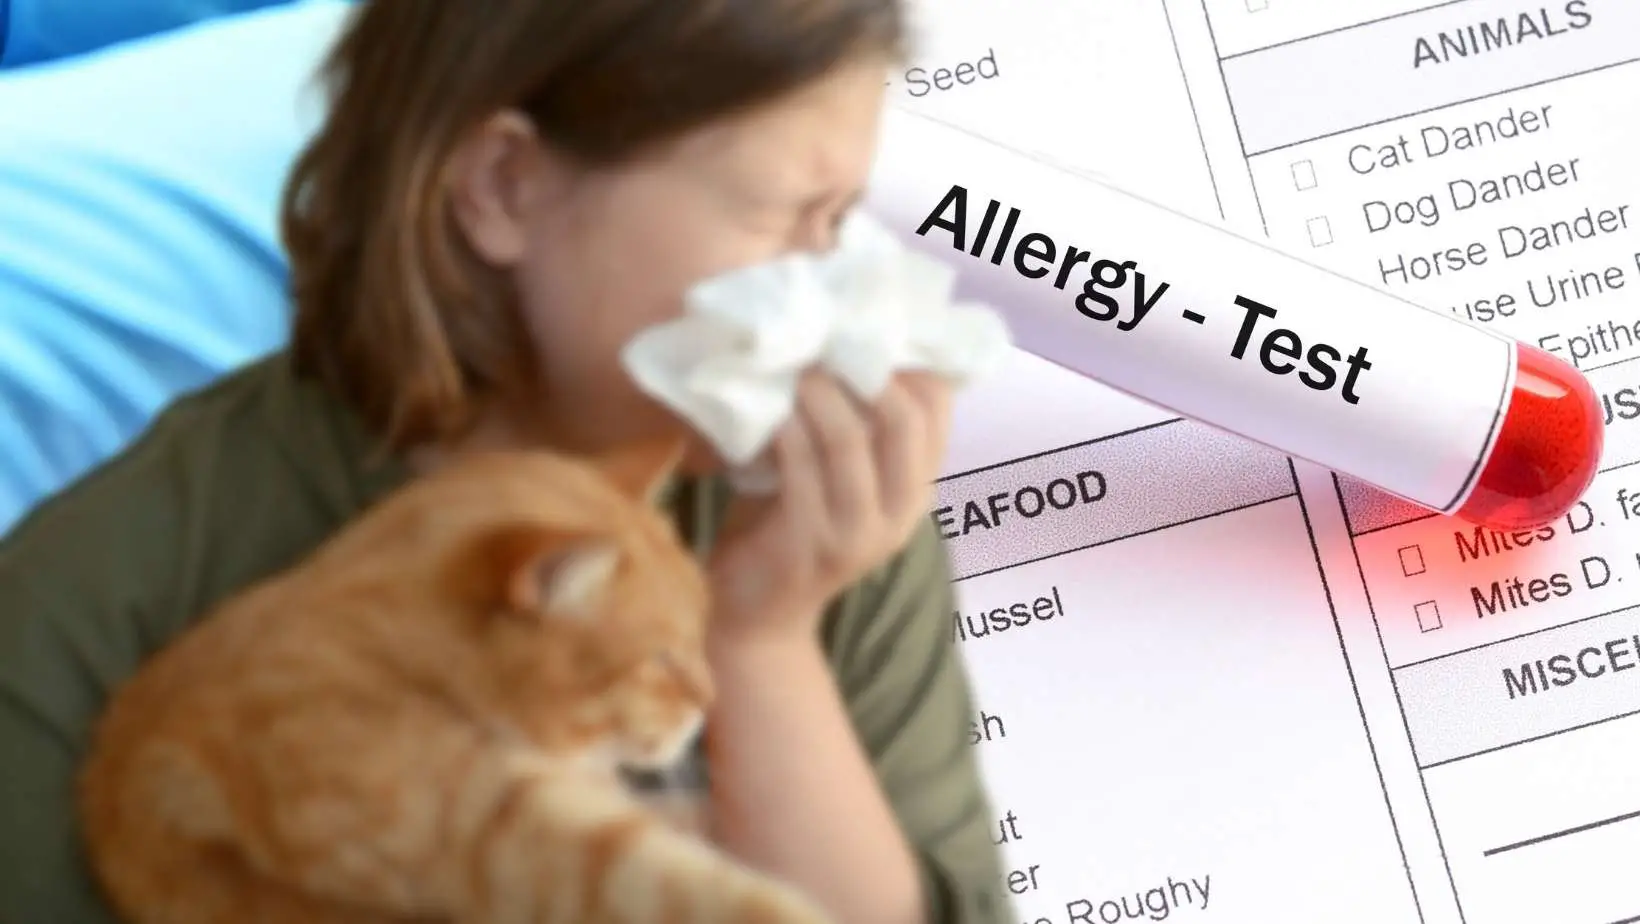 How to Test for Cat Allergy at Home?